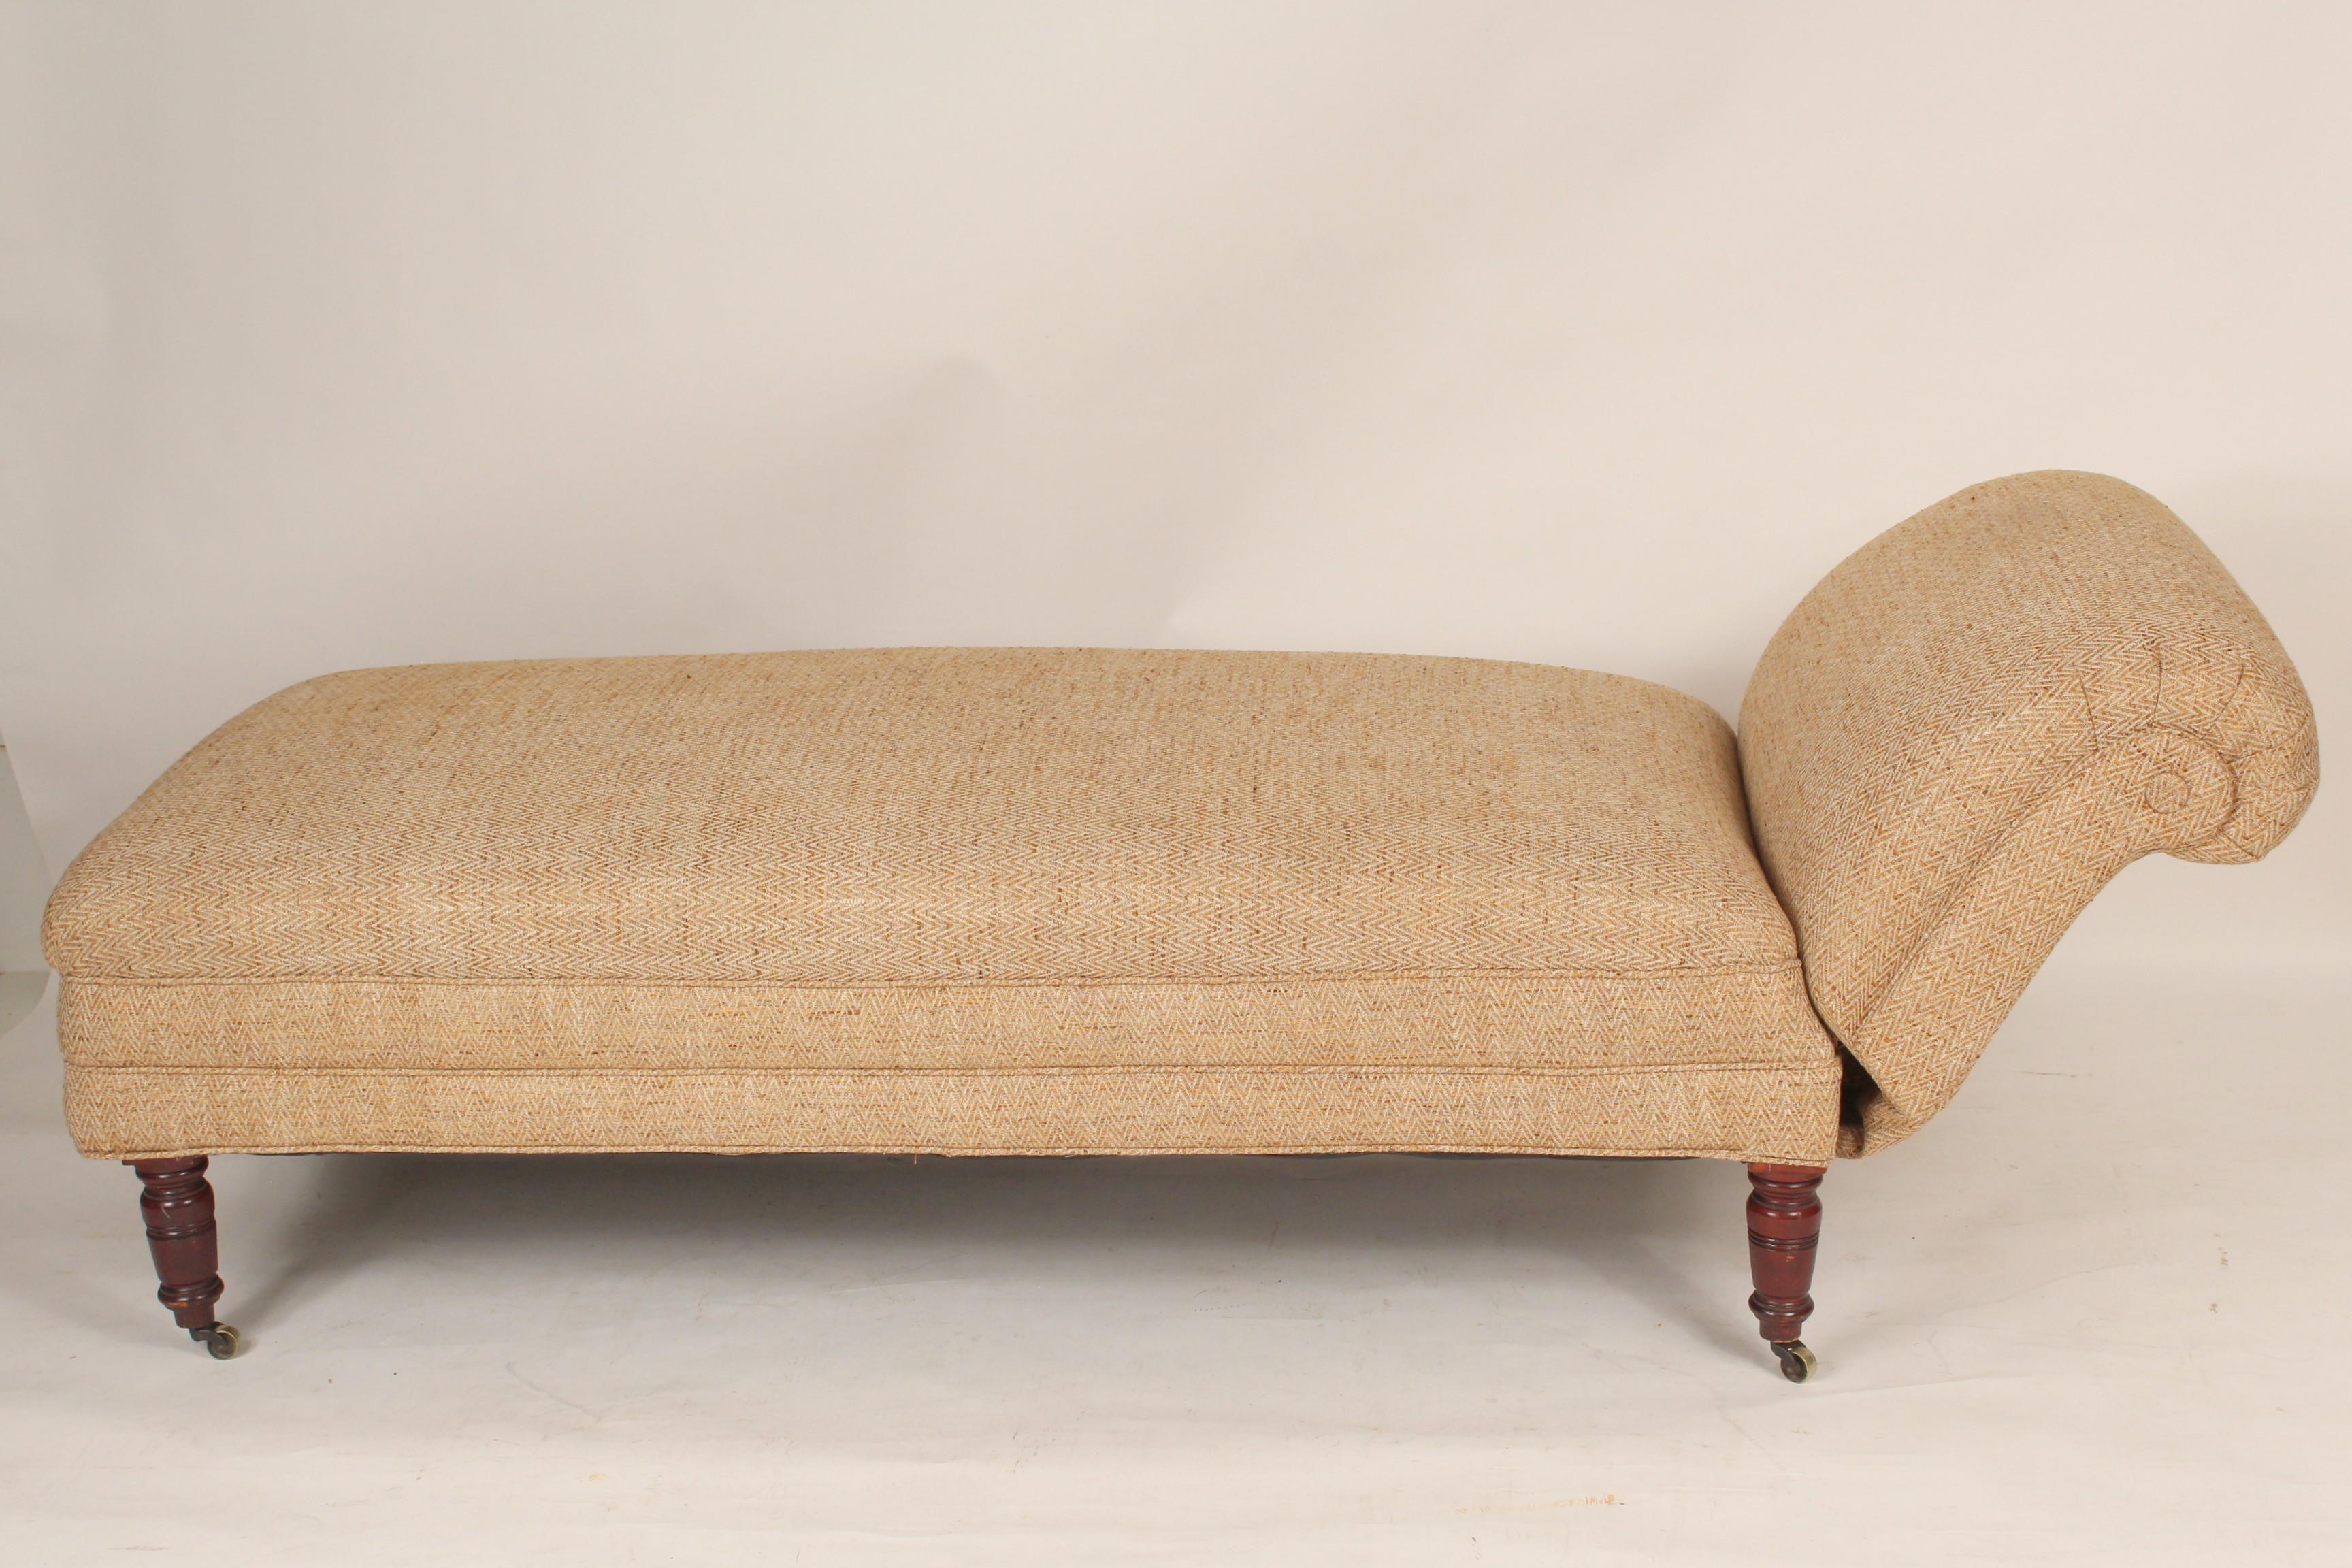 19th Century English Chaise Lounge with Adjustable Back